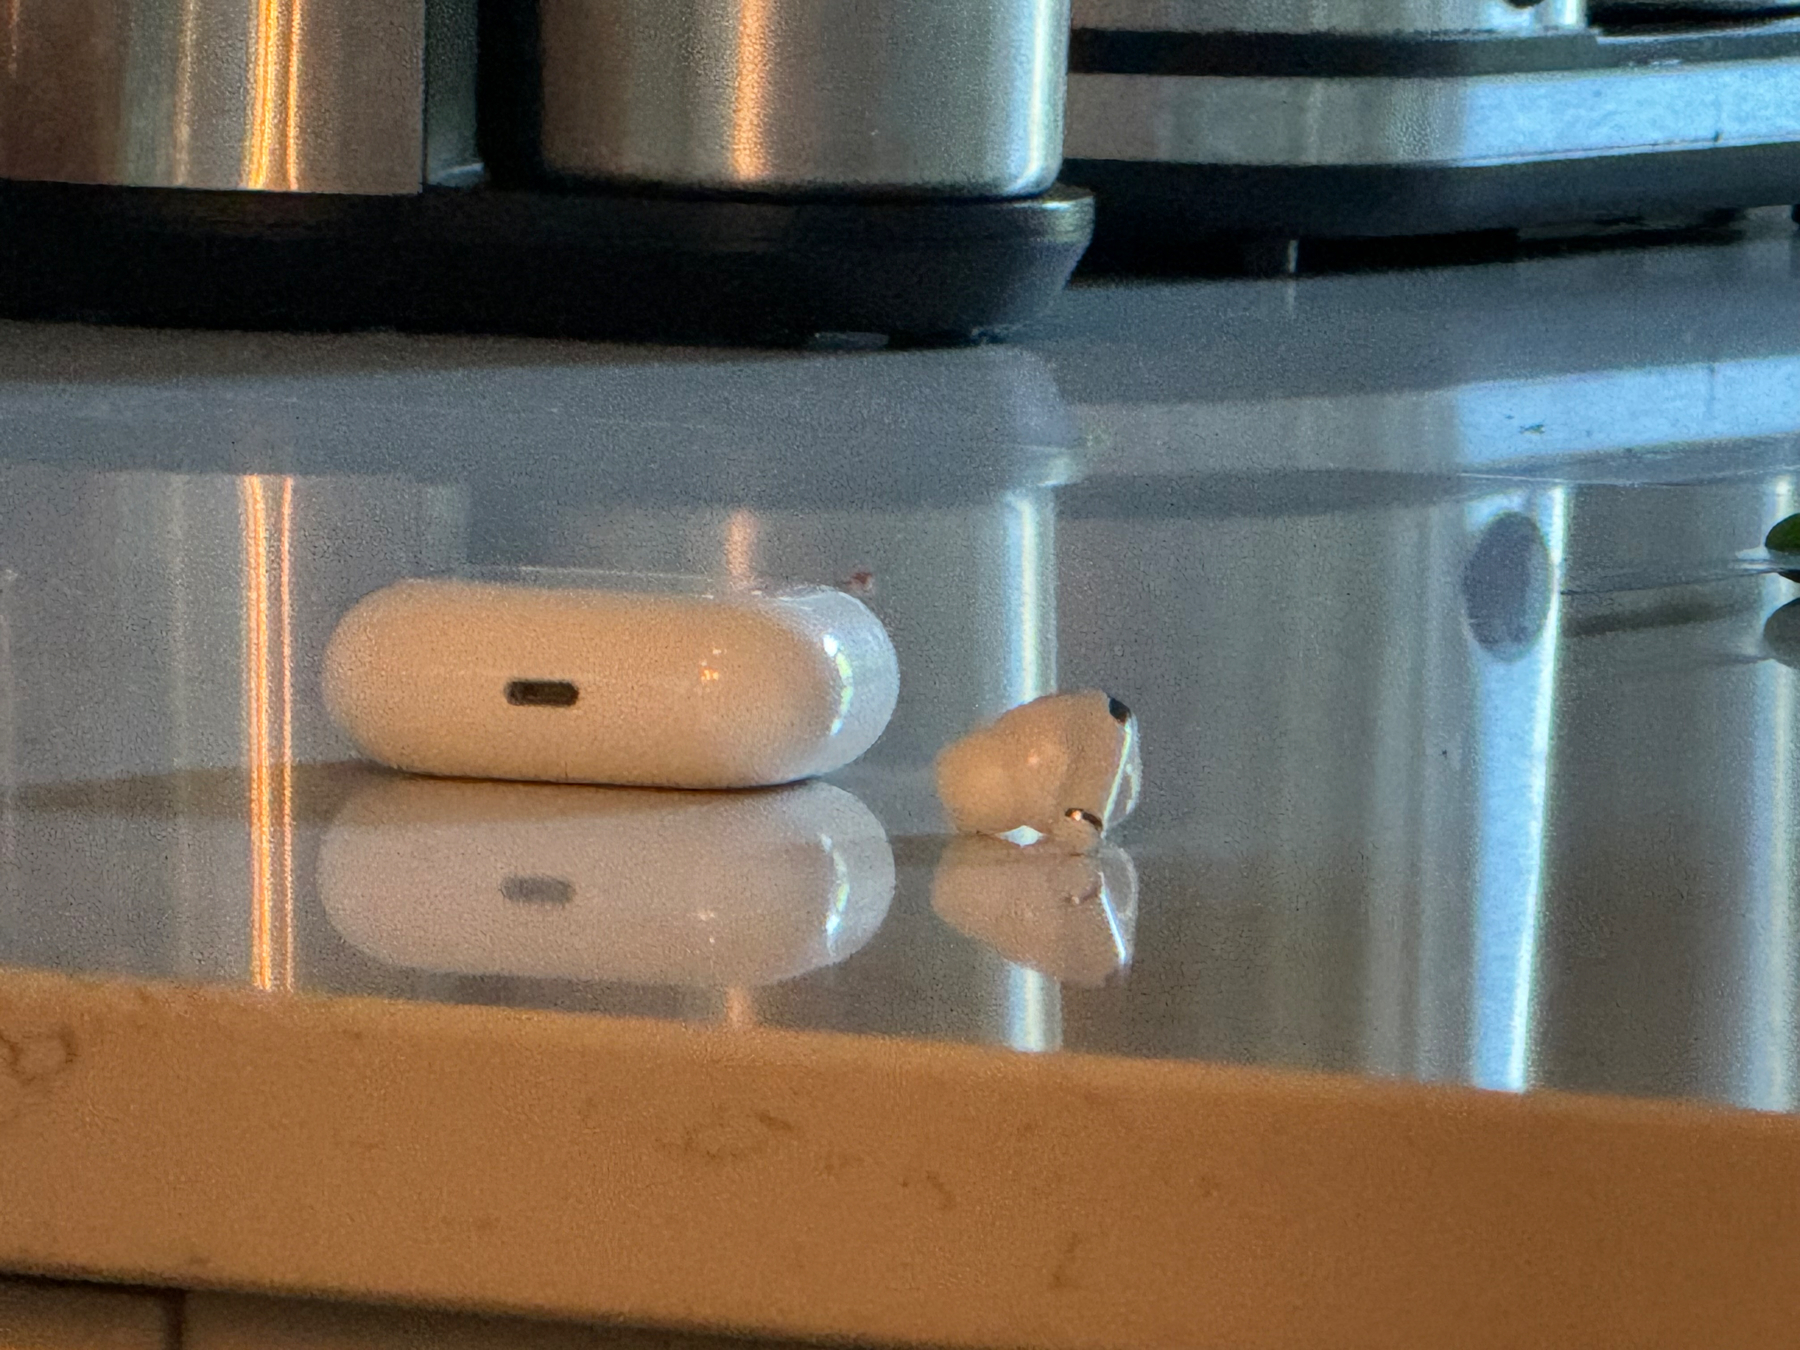 A single air pod sitting loose on a kitchen counter right next to its case 